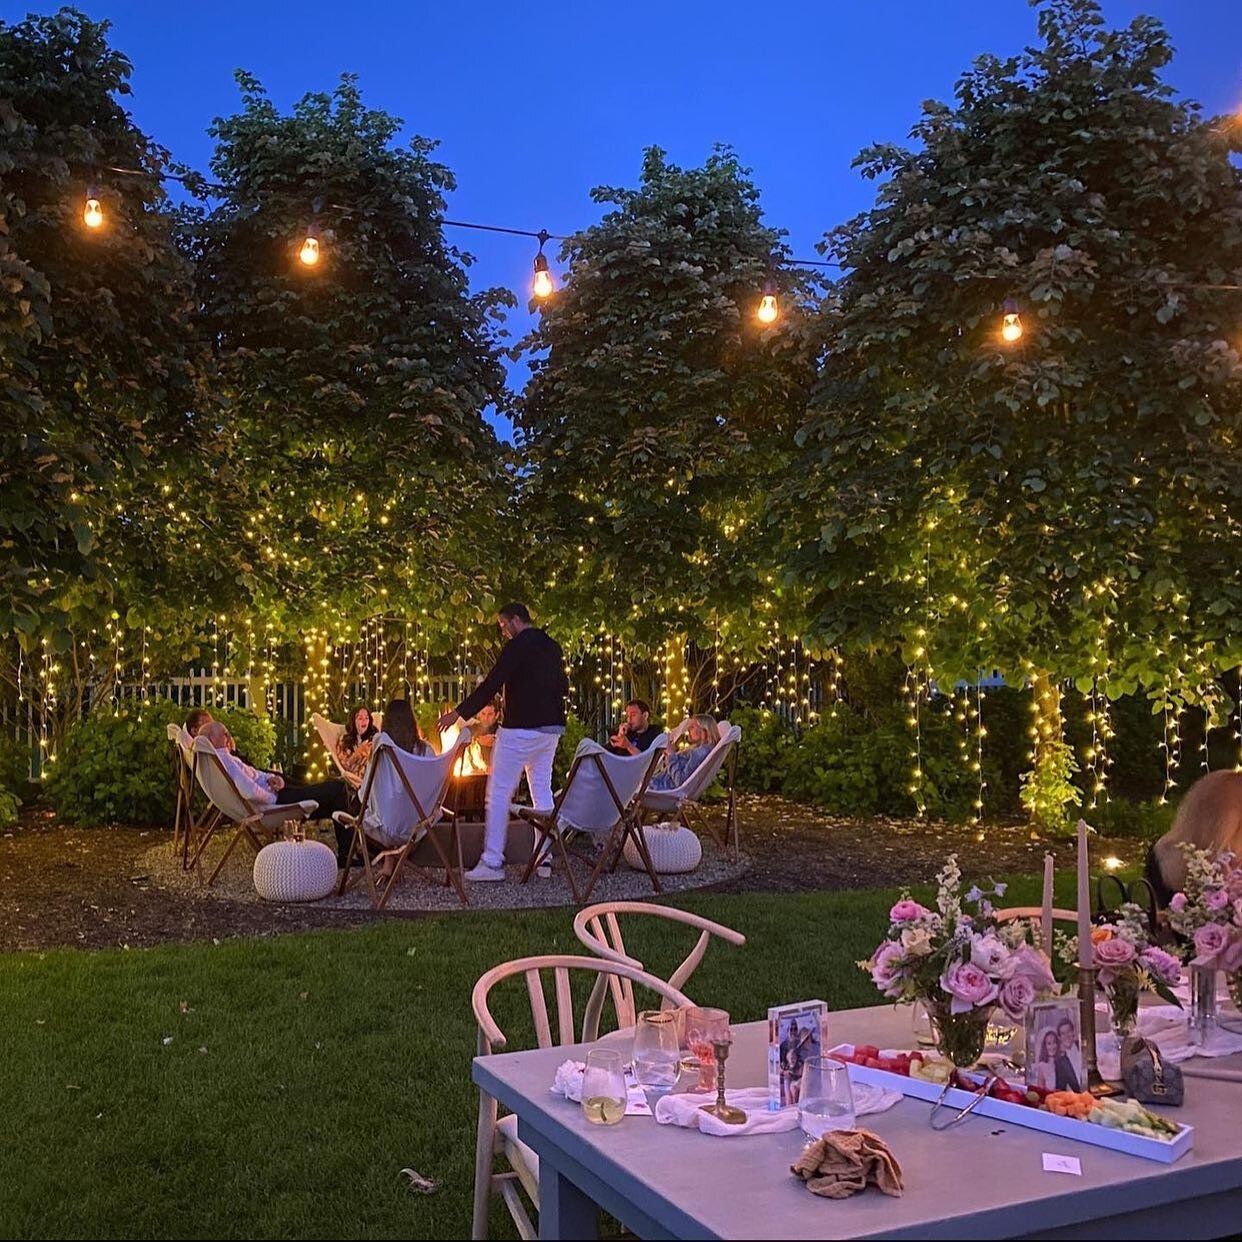 Light up your NIGHT ✨ ⠀
⠀
Edison Bulb Black Cord Bistro Lights &amp; Tree Twinkle Lights make for the perfect Summer Night Setting! 🥰 ⠀
⠀
Original Event: @kerenprecel ⠀
⠀
#BistroLighting #FairyLights #EventProduction #DeccoByPartyUp #SummerEvents ⠀
